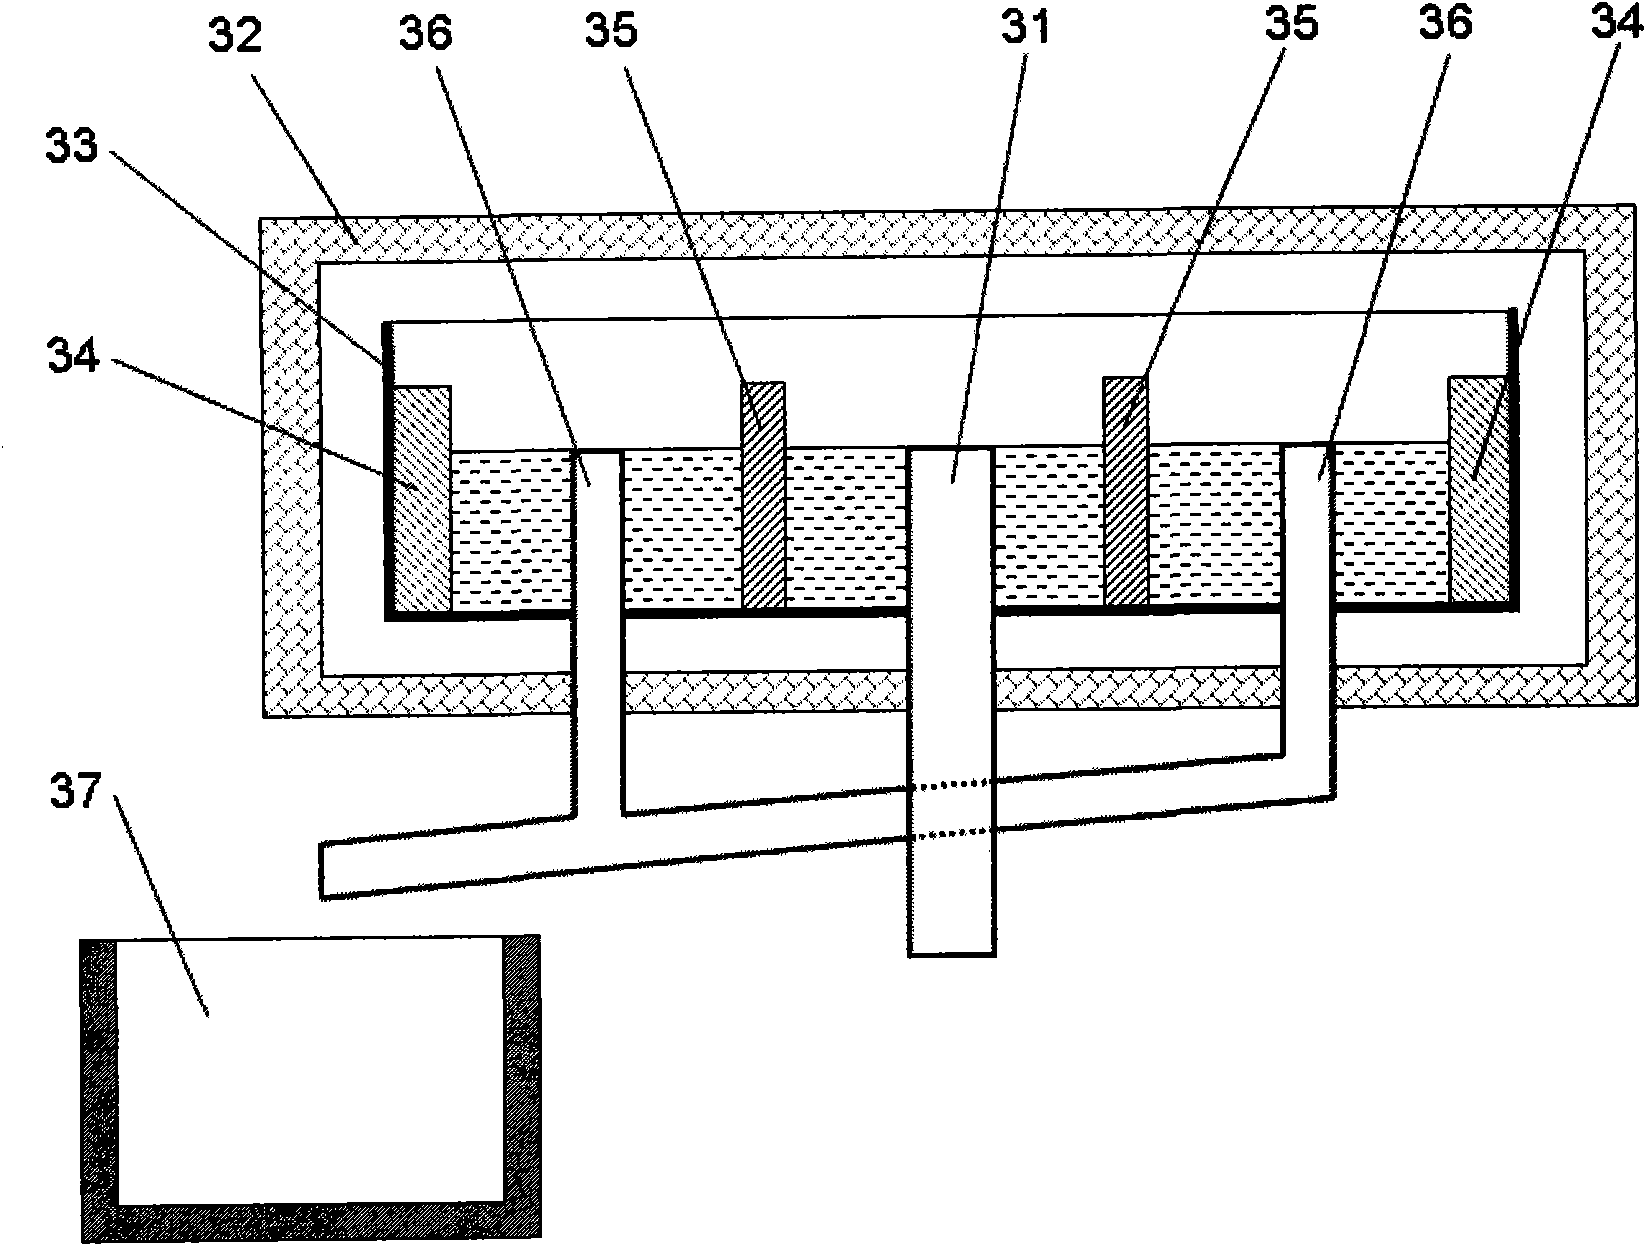 Purifying system of high purity polysilicon and purifying method